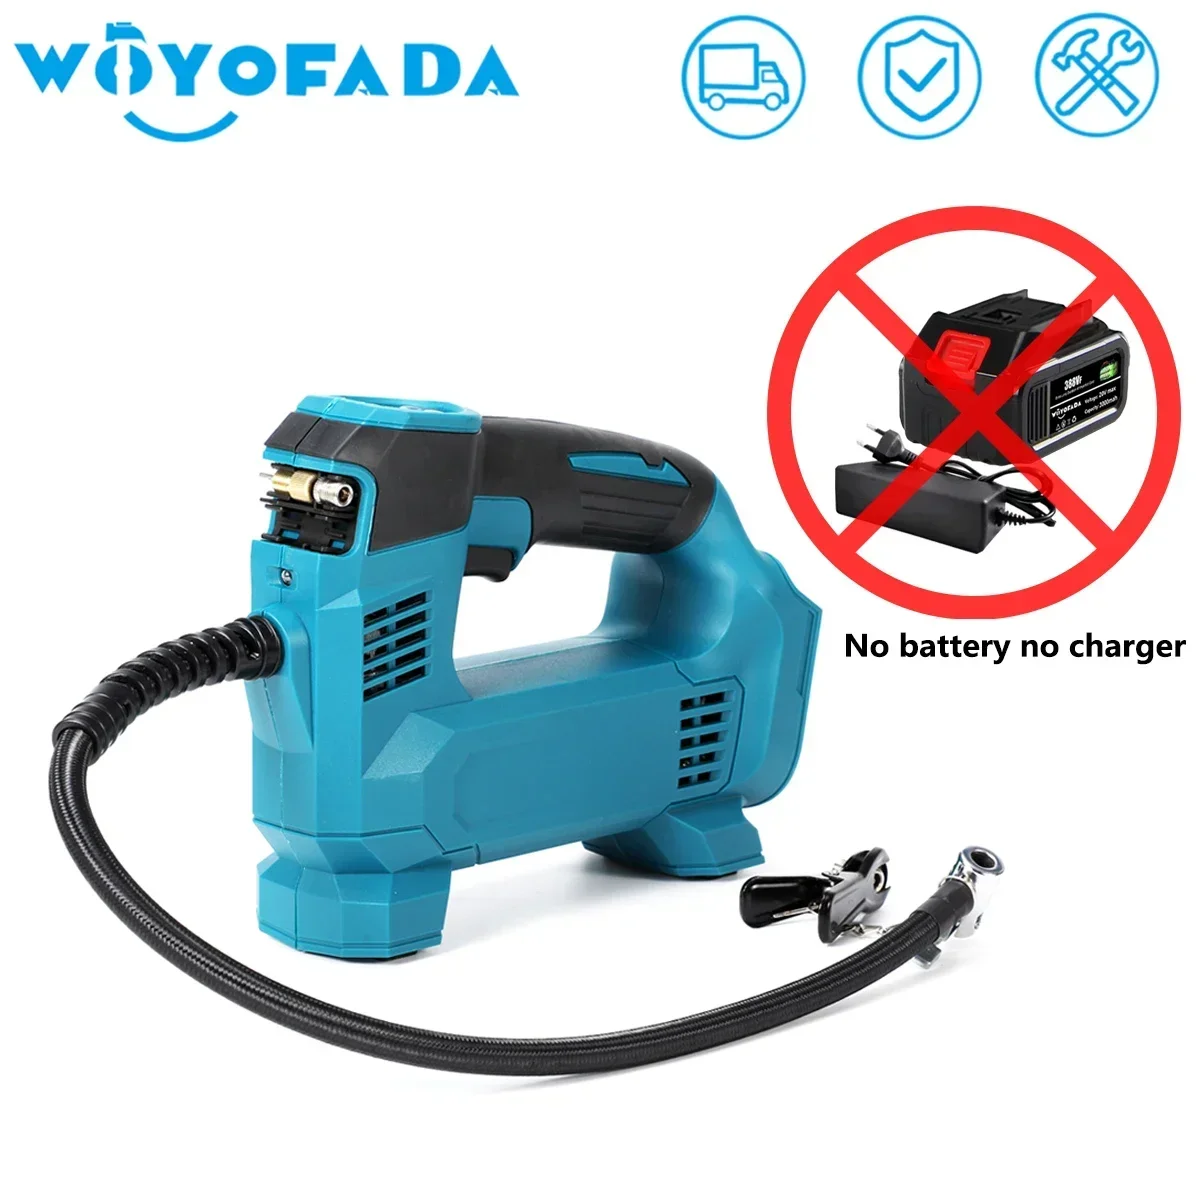 WOYOFADA Cordless Portable Electric Air Pump Car Tire Inflator Air Compressor For Car Bicycle Tires Balls For Makita 18V Battery car air pump 120psi electric air compressor portable digital tire inflator support preset pressure auto off function with led light for car motorcycle bicycle tires balls